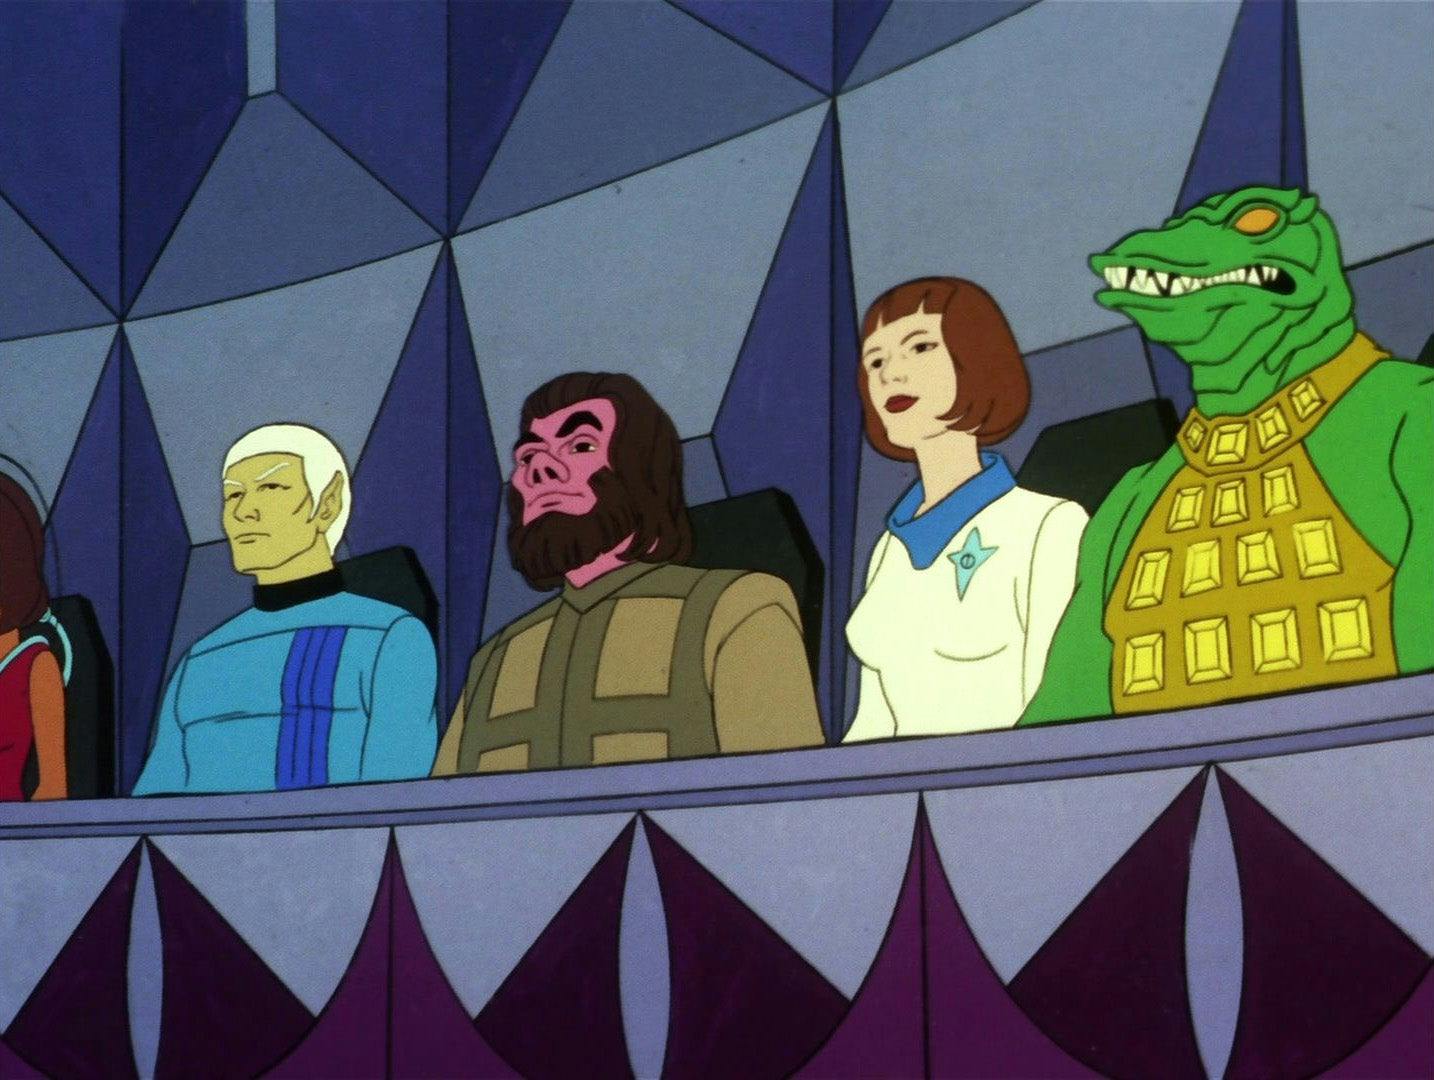 A Vulcan, Tellarite, human, and Gorn sit side-by-side and look ahead in 'The Time Trap'